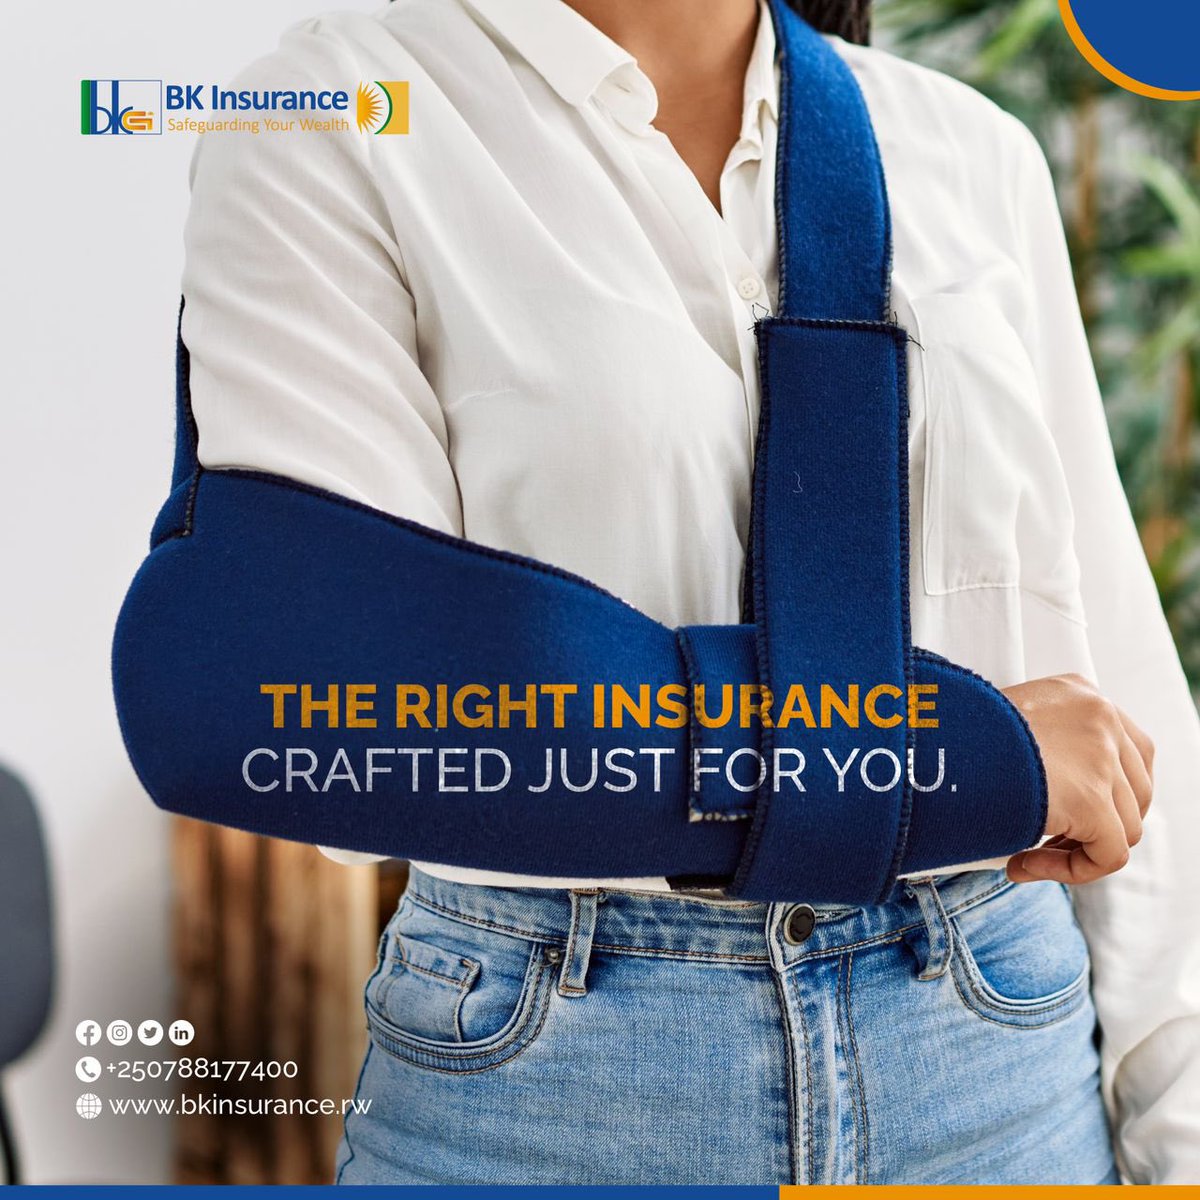 Finding comfort in the assurance that you'll have support in case of an accident is reassuring. With BK Insurance's accident insurance, you can rely on having that support whenever you need it. #BKInsurance #SafeGuardingYourWealth #RwoX #Rwot